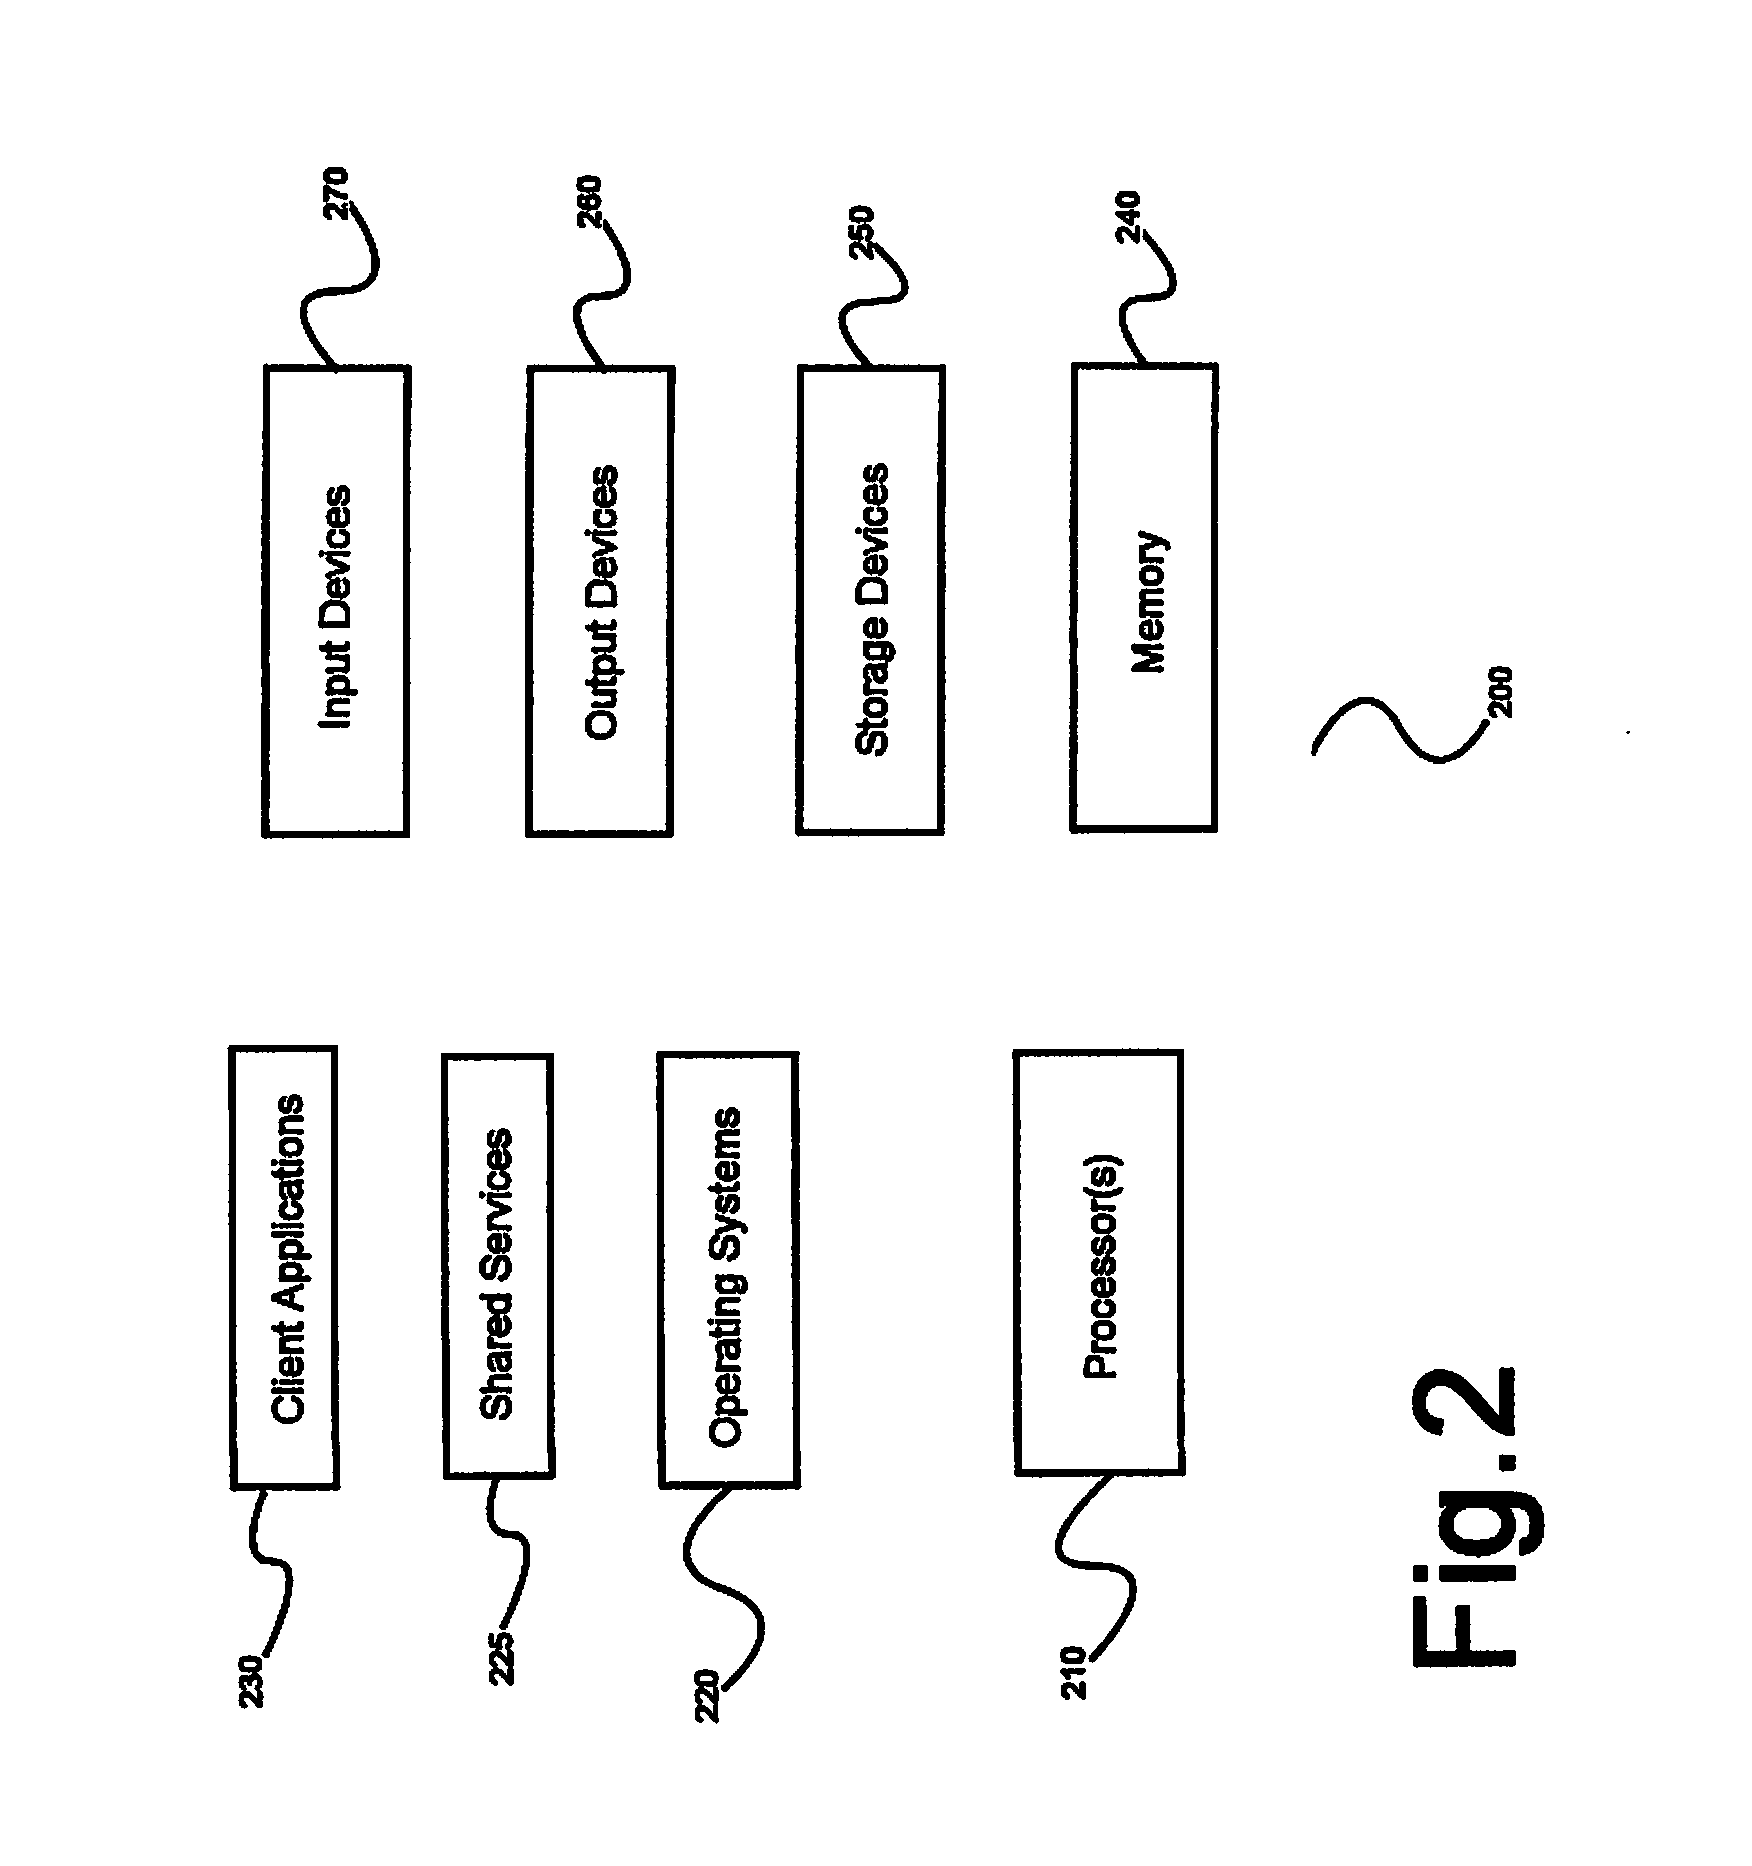 System and method for speaker recognition on mobile devices